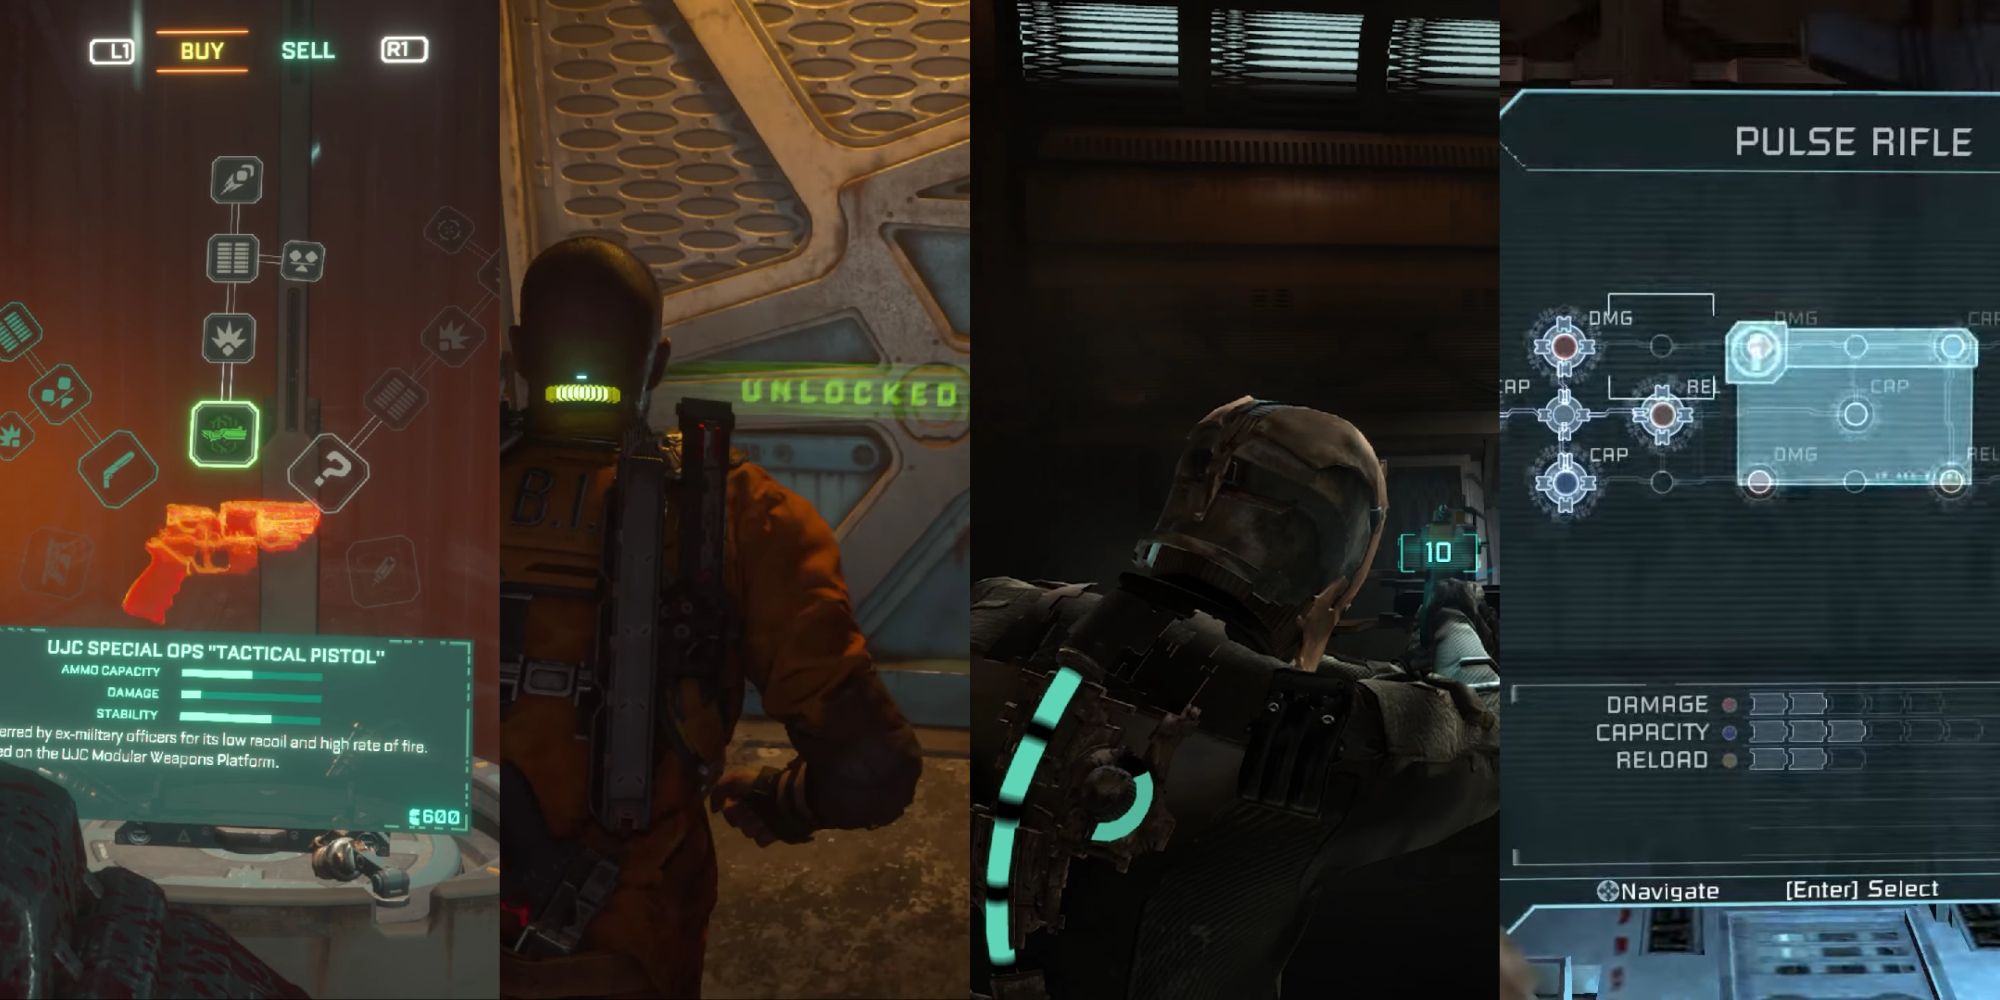 A collage of four images contrasting the UI features between The Callisto Protocol and Dead Space, focusing on upgrading and health bar system.